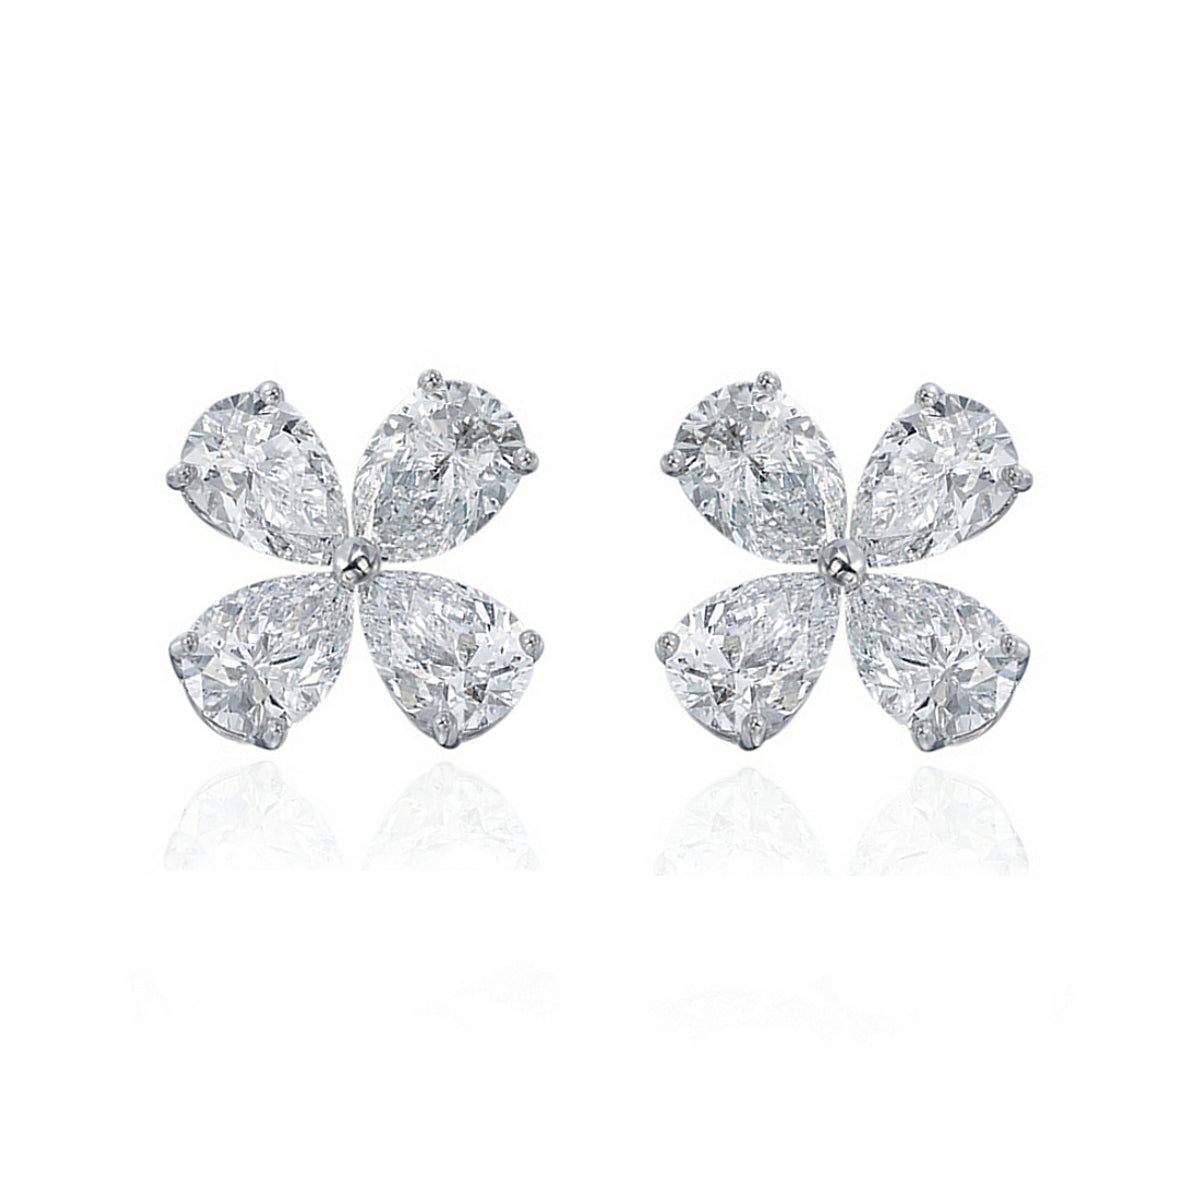 Pear Shaped Diamond Earrings Available in Varying Sizes and Prices